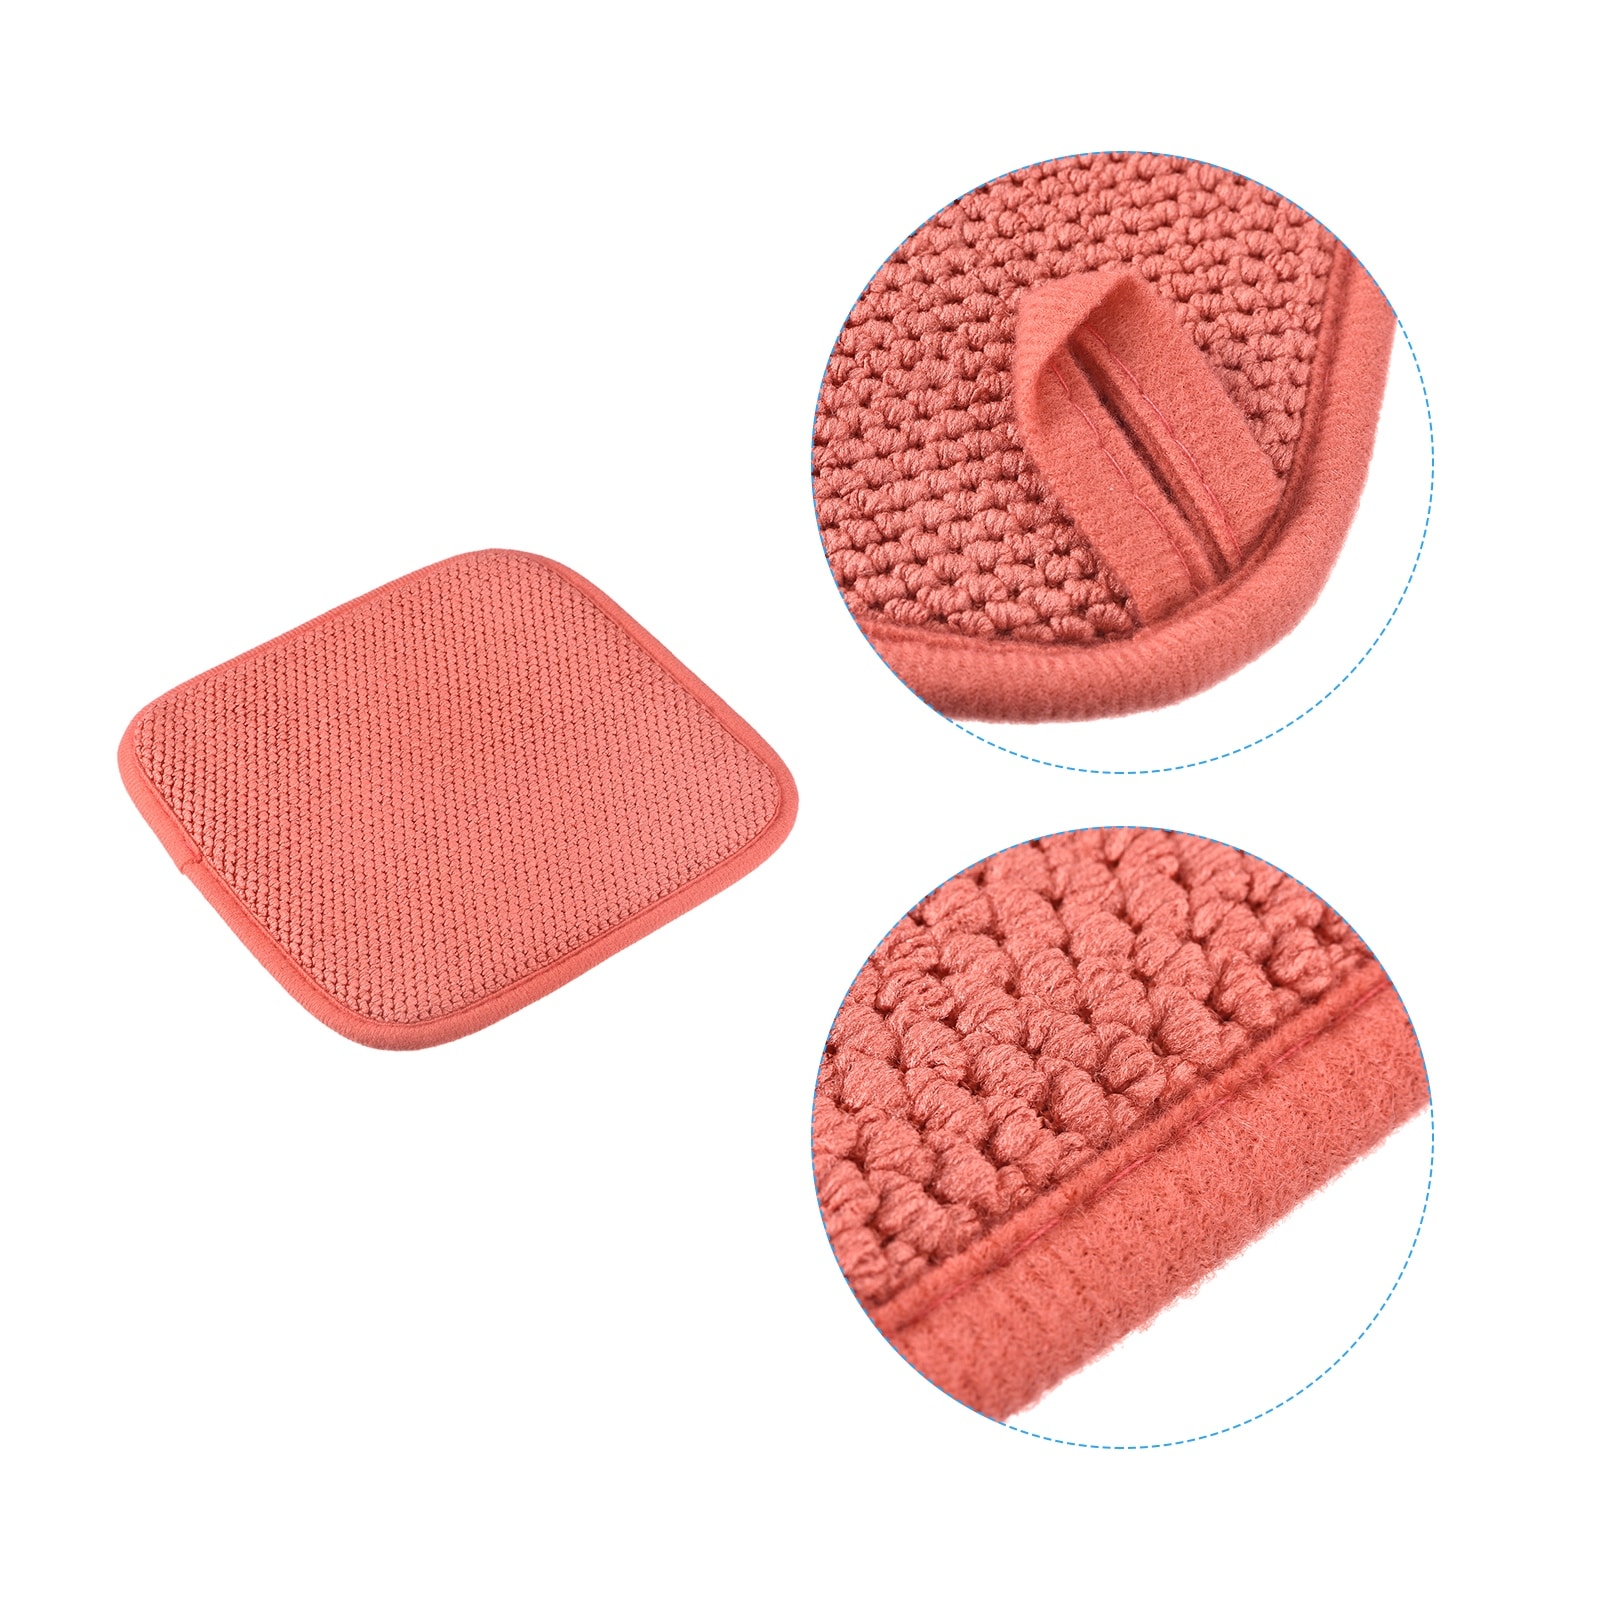 https://ak1.ostkcdn.com/images/products/is/images/direct/d10648c0e56edec03af92dccc037f3237ad69b04/Dish-Drying-Mat%2C-7.87%22-x-7.87%22-Microfiber-Dishes-Drainer-Mats-Red.jpg